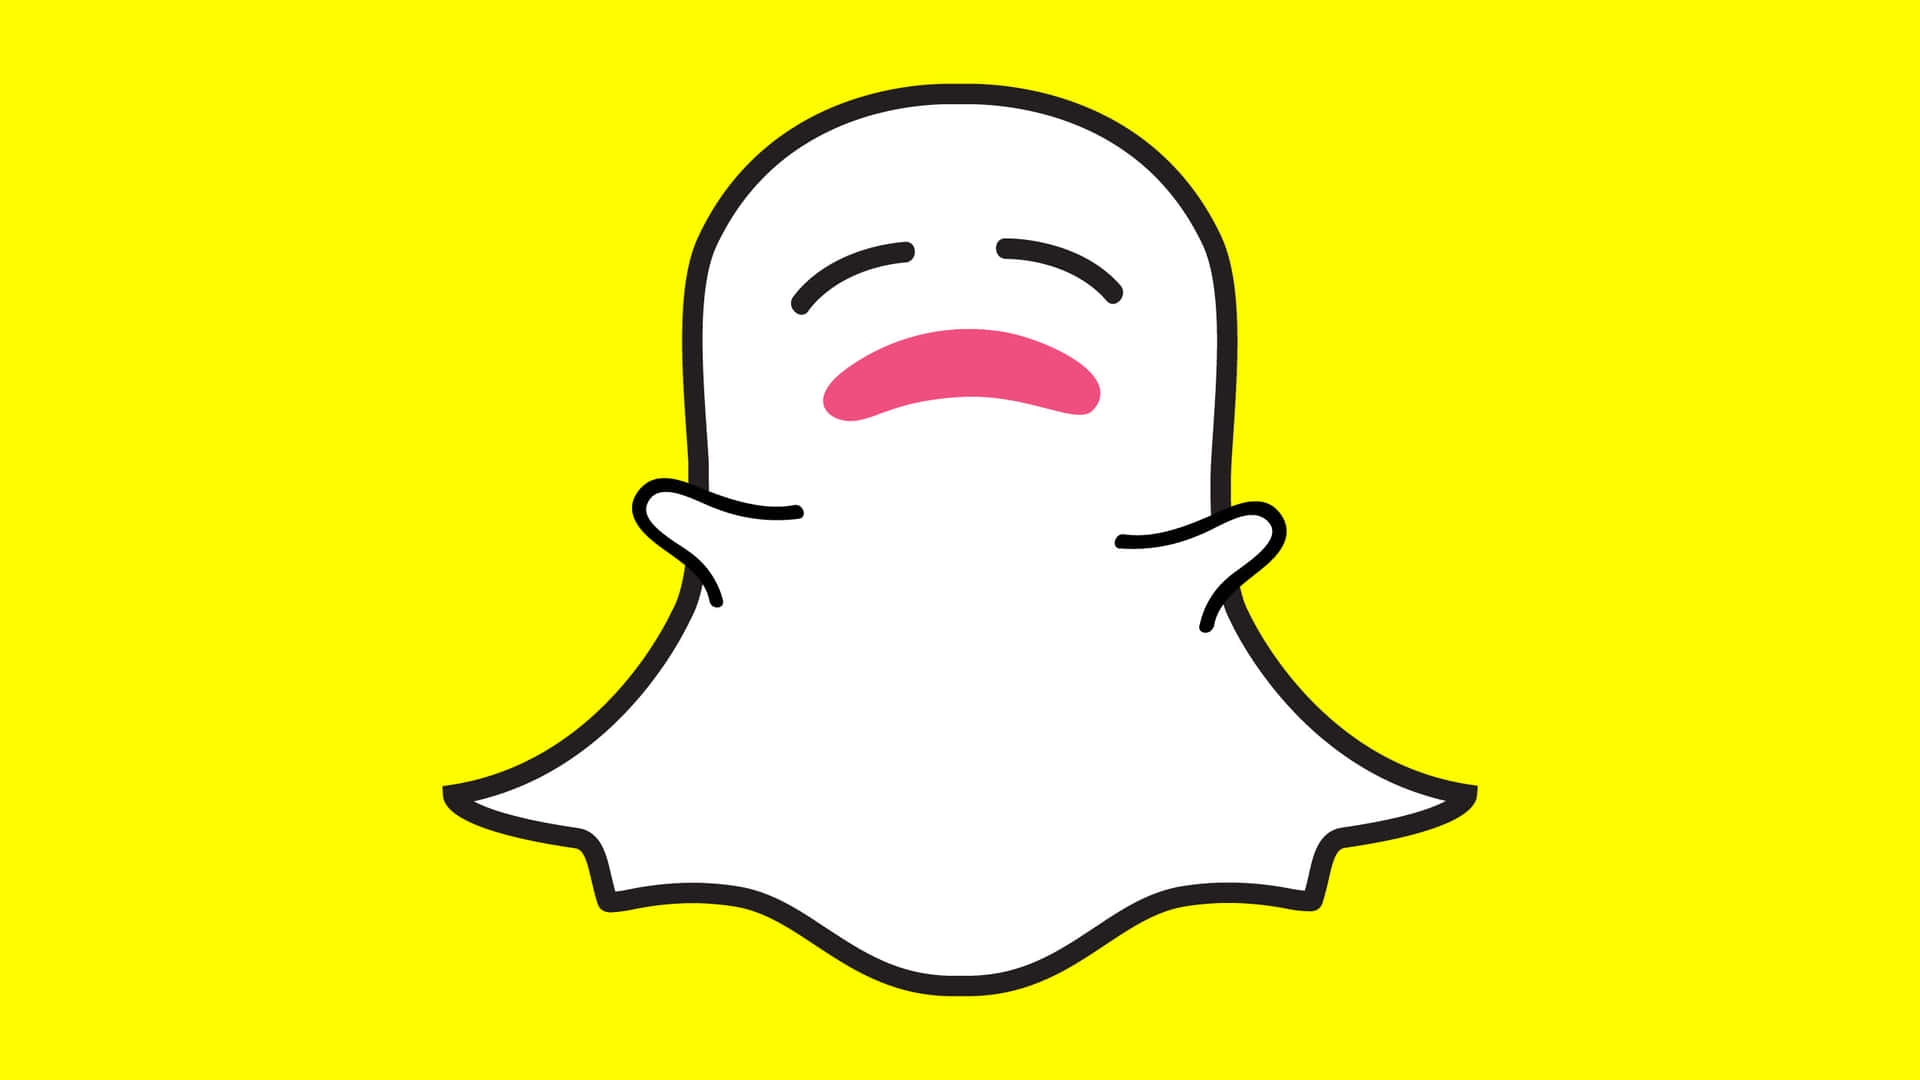 Keep up with the fun, follow us on Snapchat!